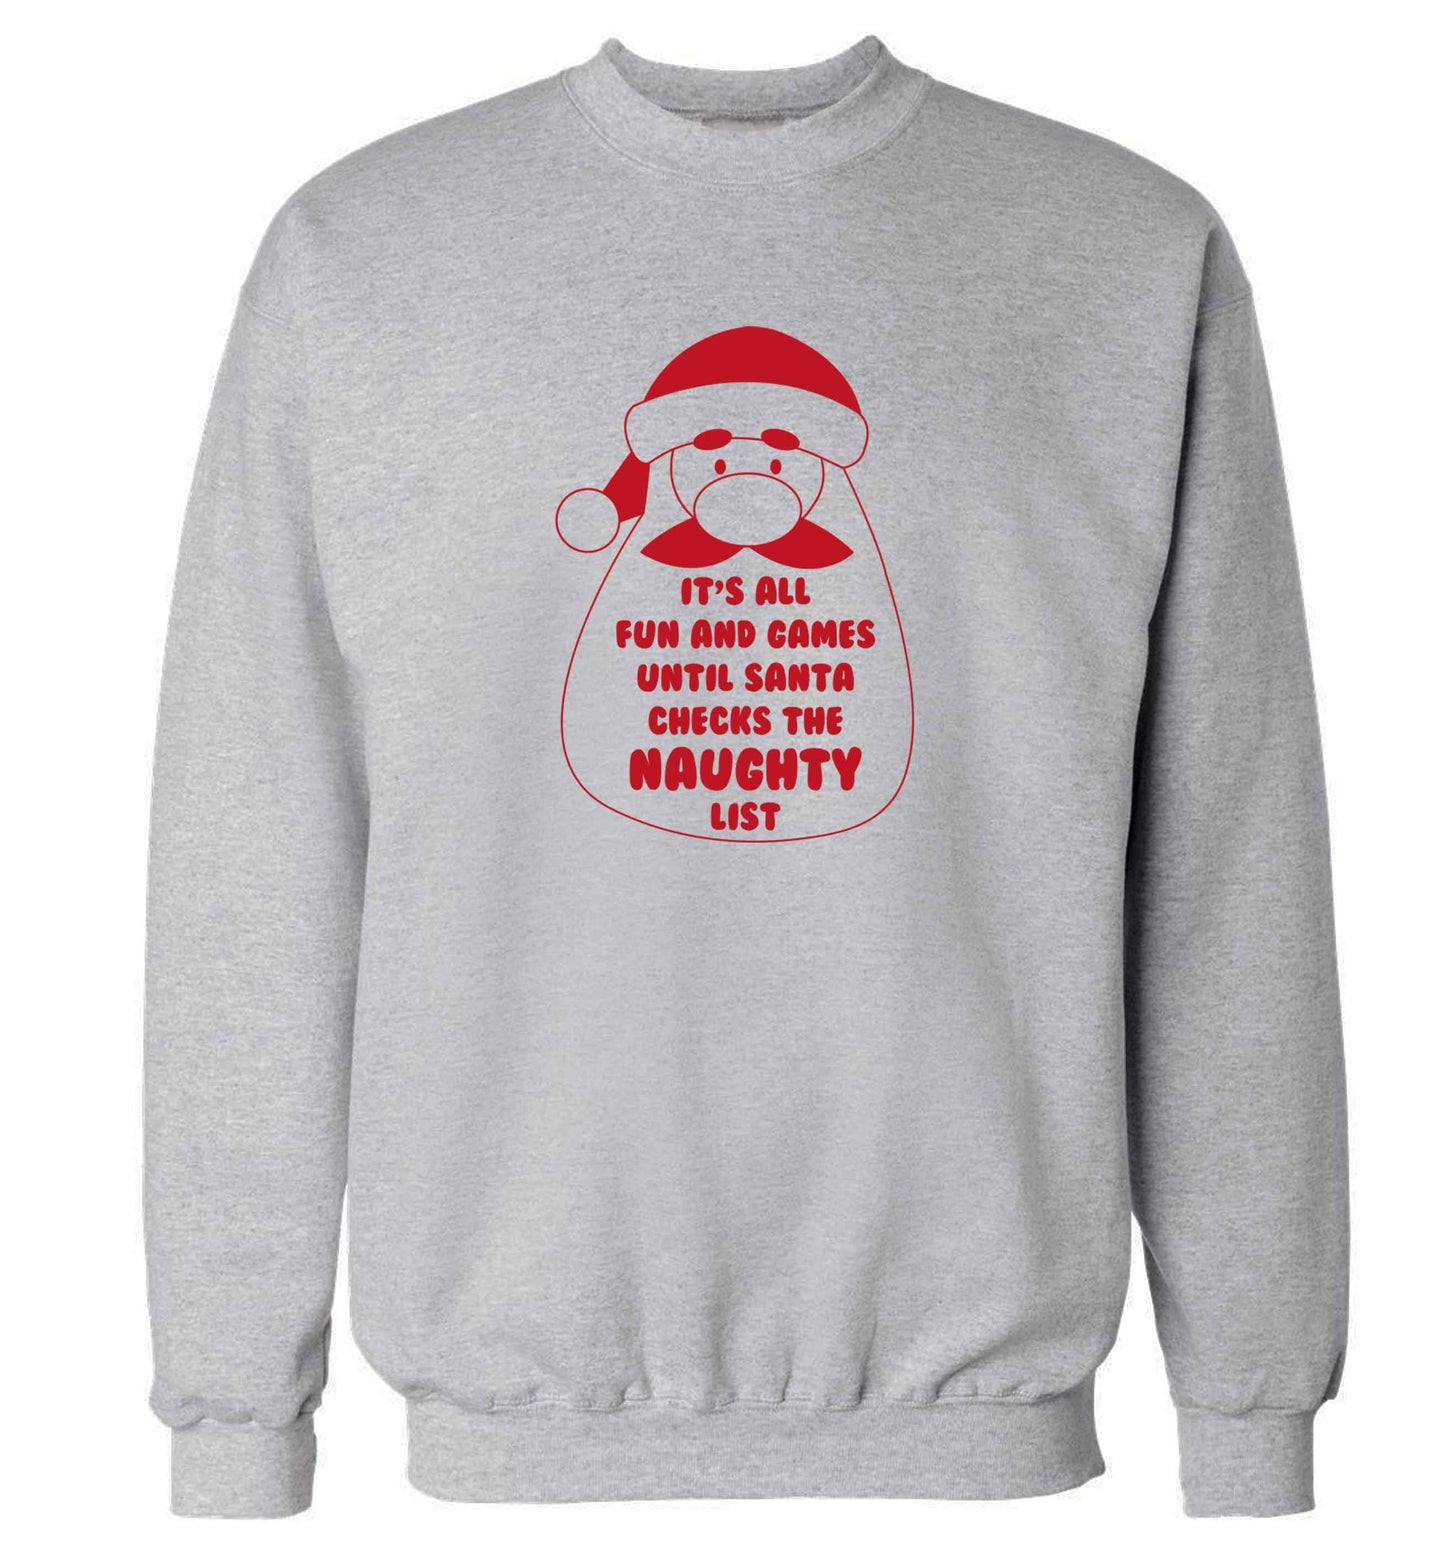 It's all fun and games until Santa checks the naughty list adult's unisex grey sweater 2XL